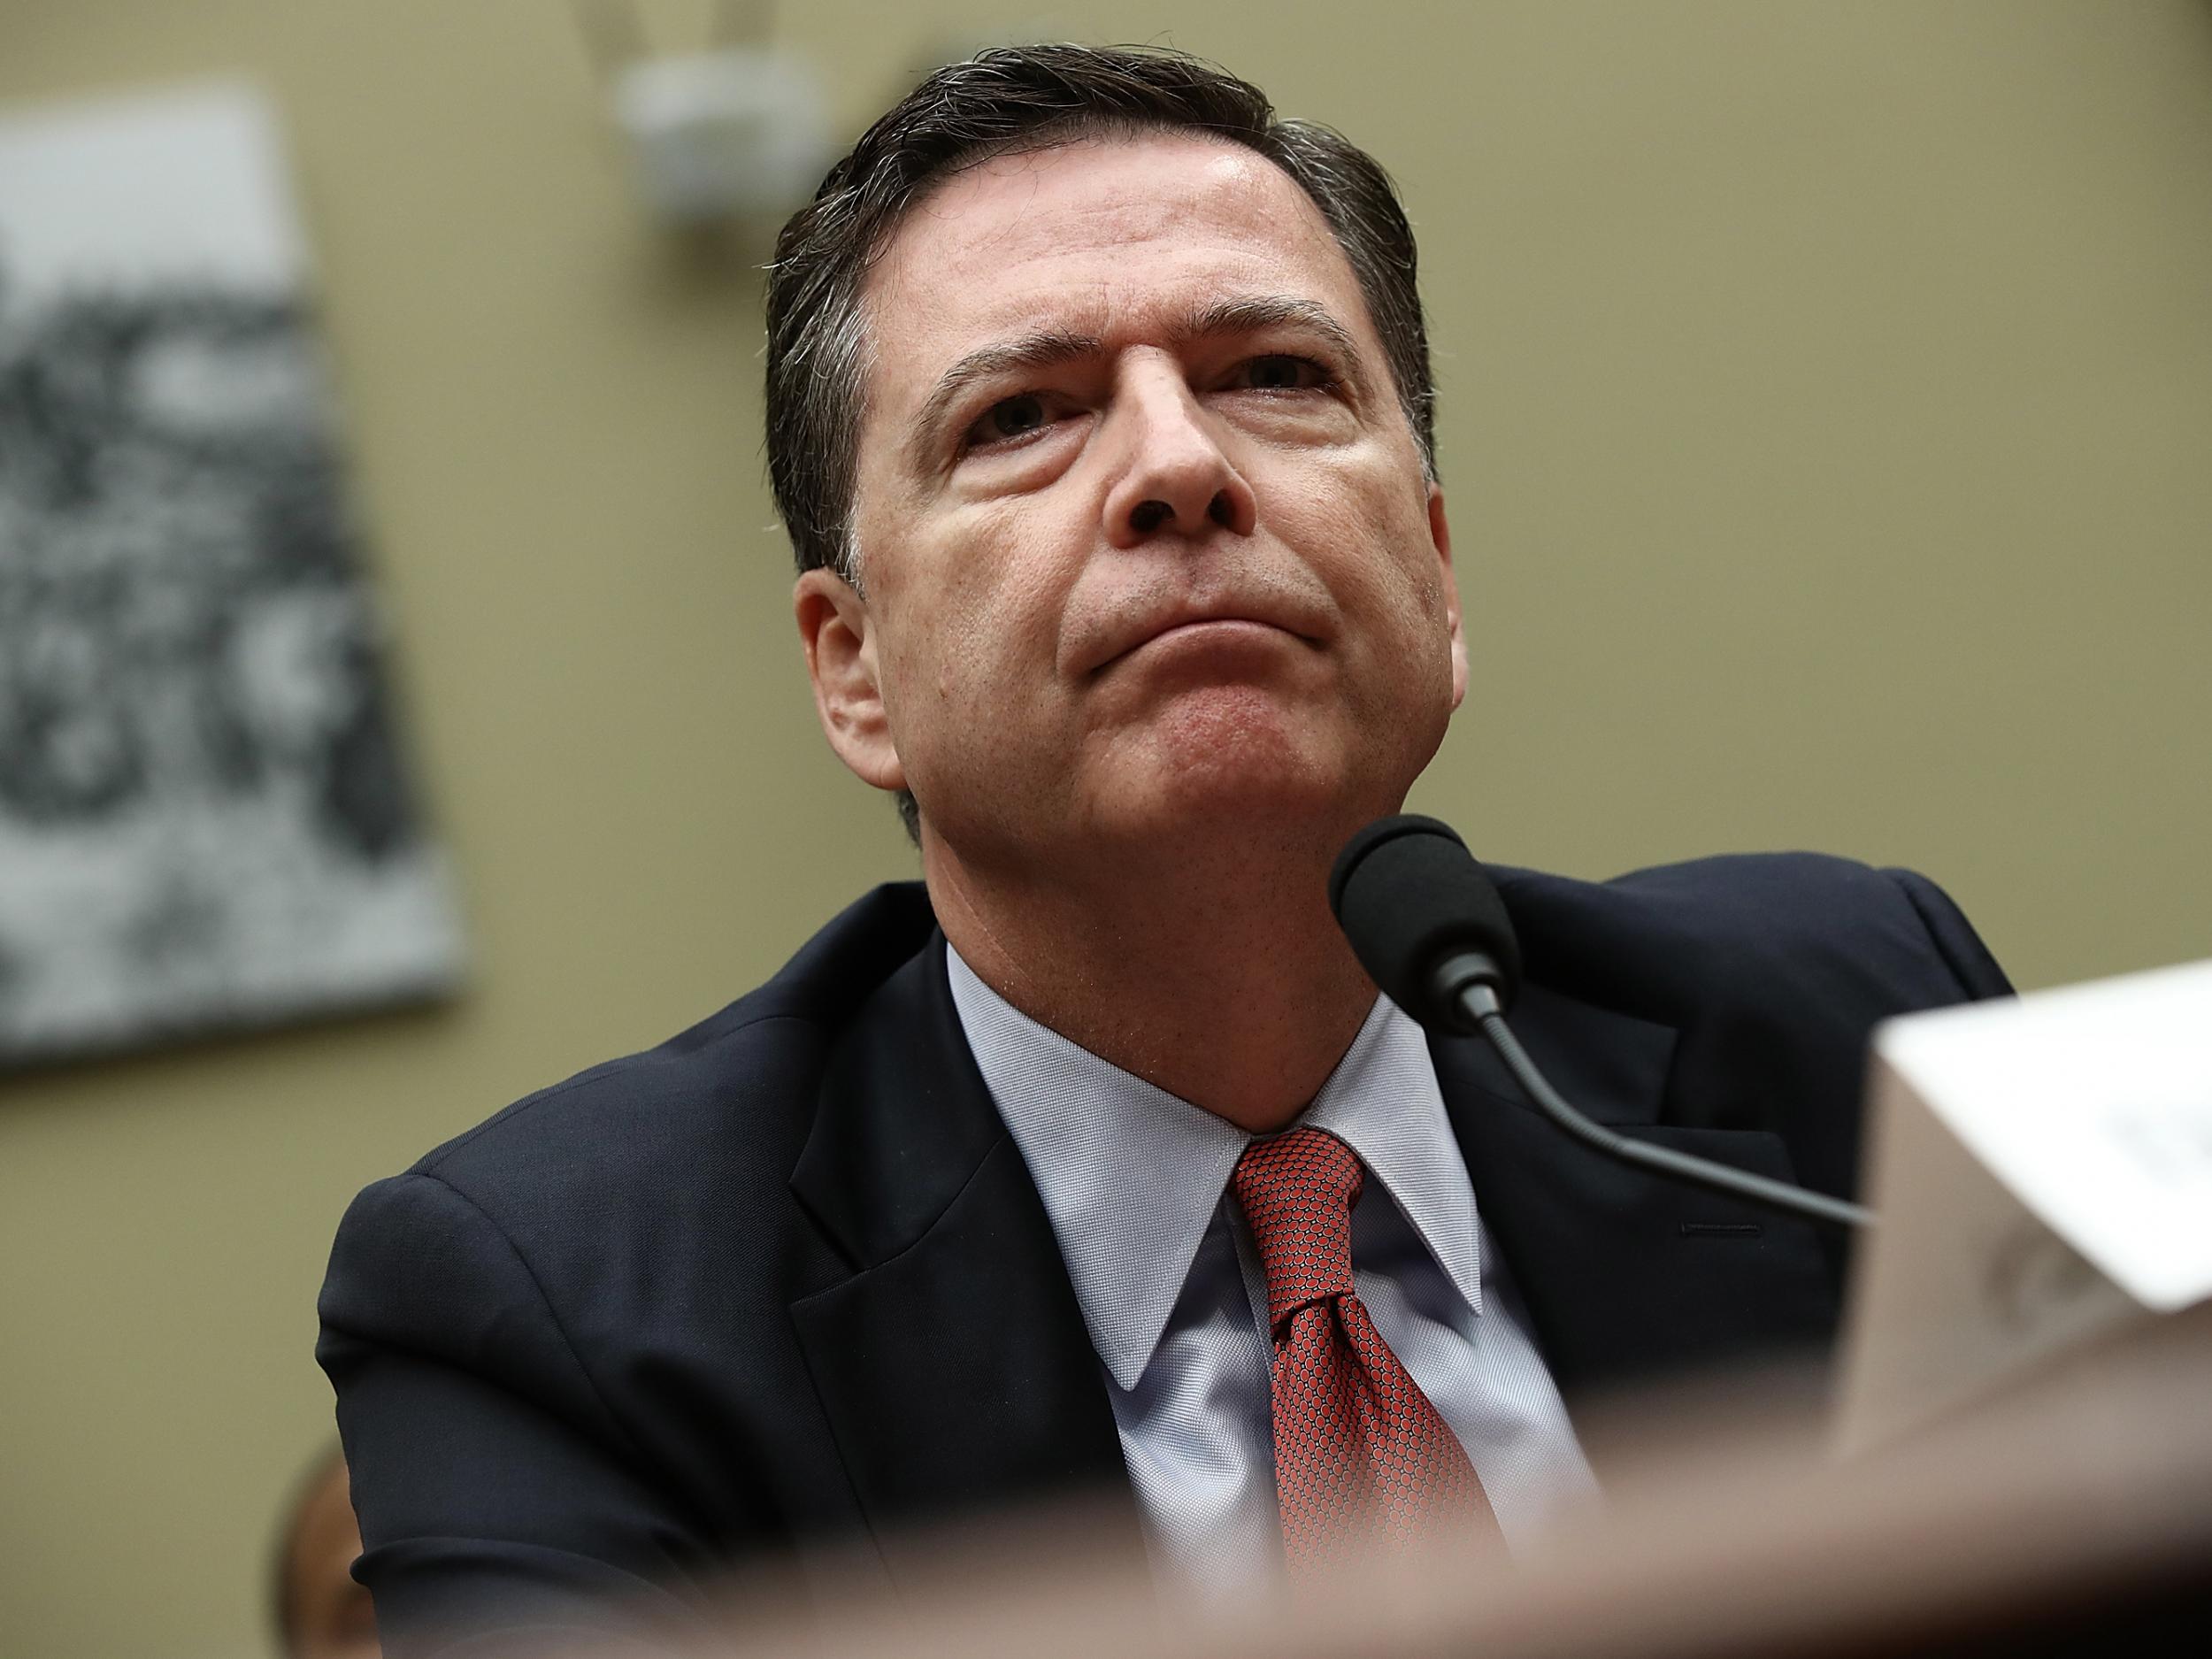 James Comey has not commented publicly on the wiretapping claims yet